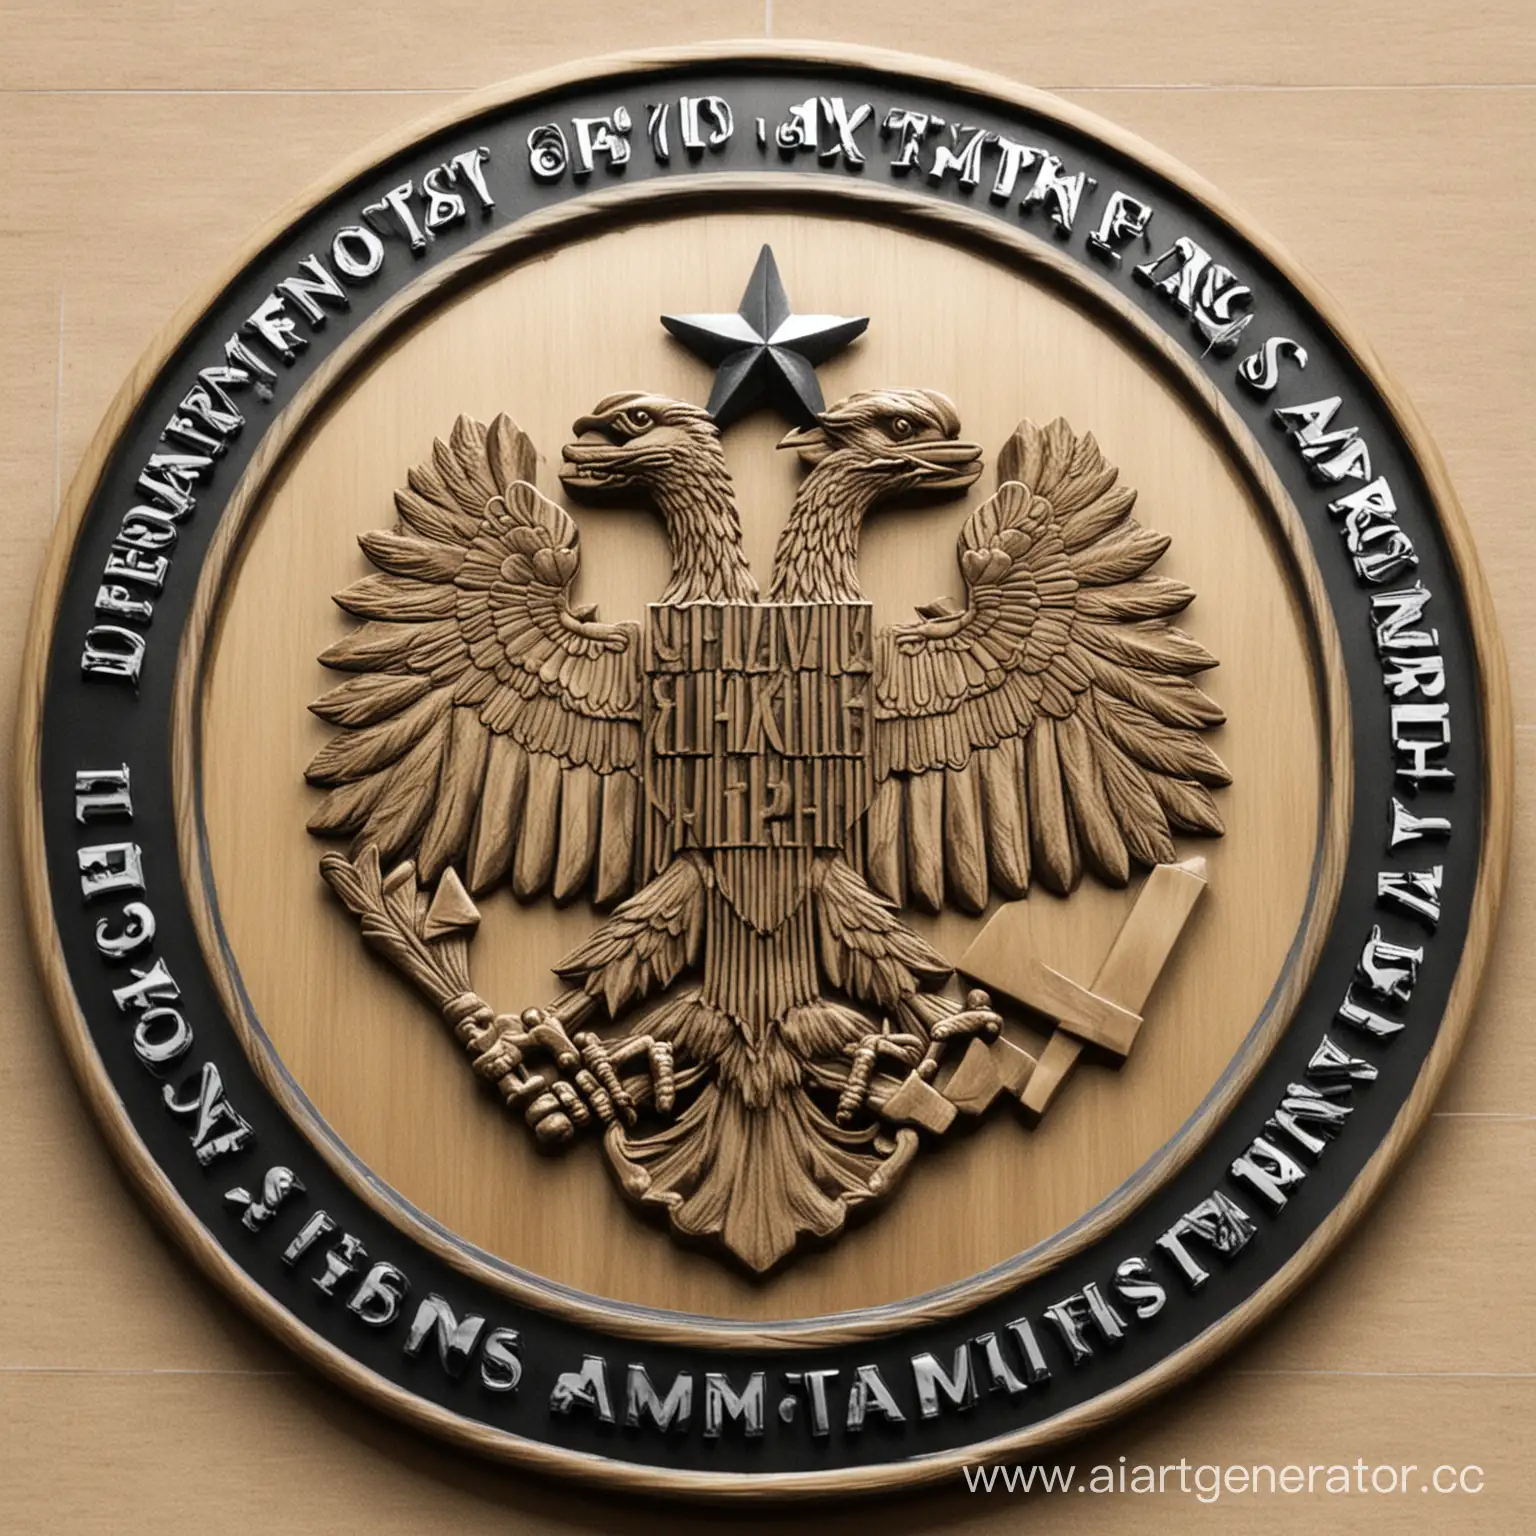 AIS-Department-of-Information-Systems-Administration-Logo-for-Federal-Tax-Service-of-Russia